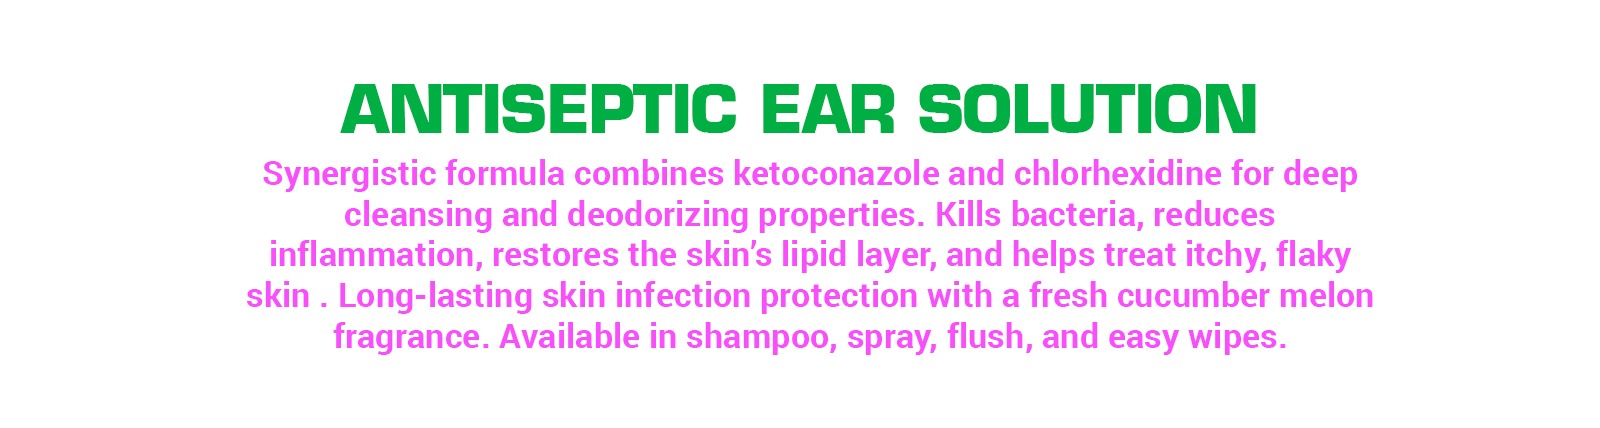 antiseptic-ear-solution